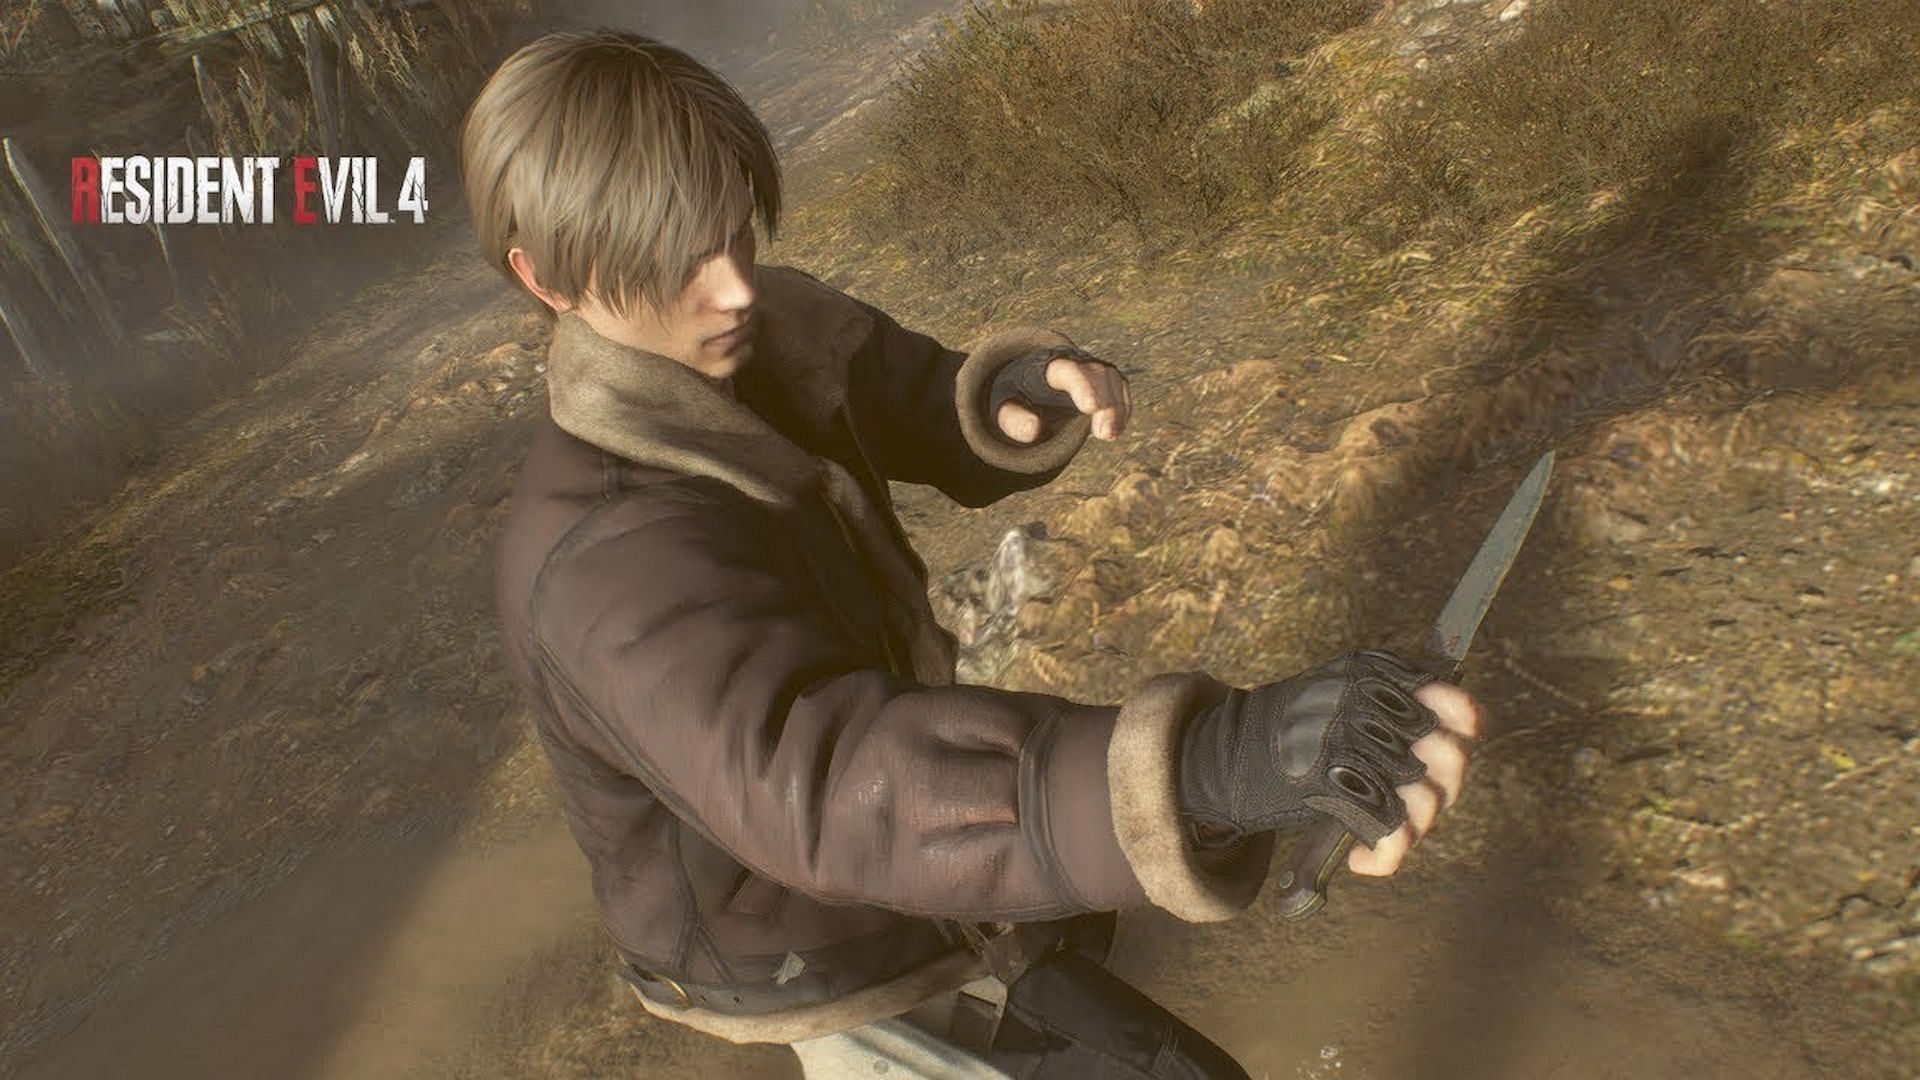 Resident Evil 4 remake preview: New knife, stealth, and combat